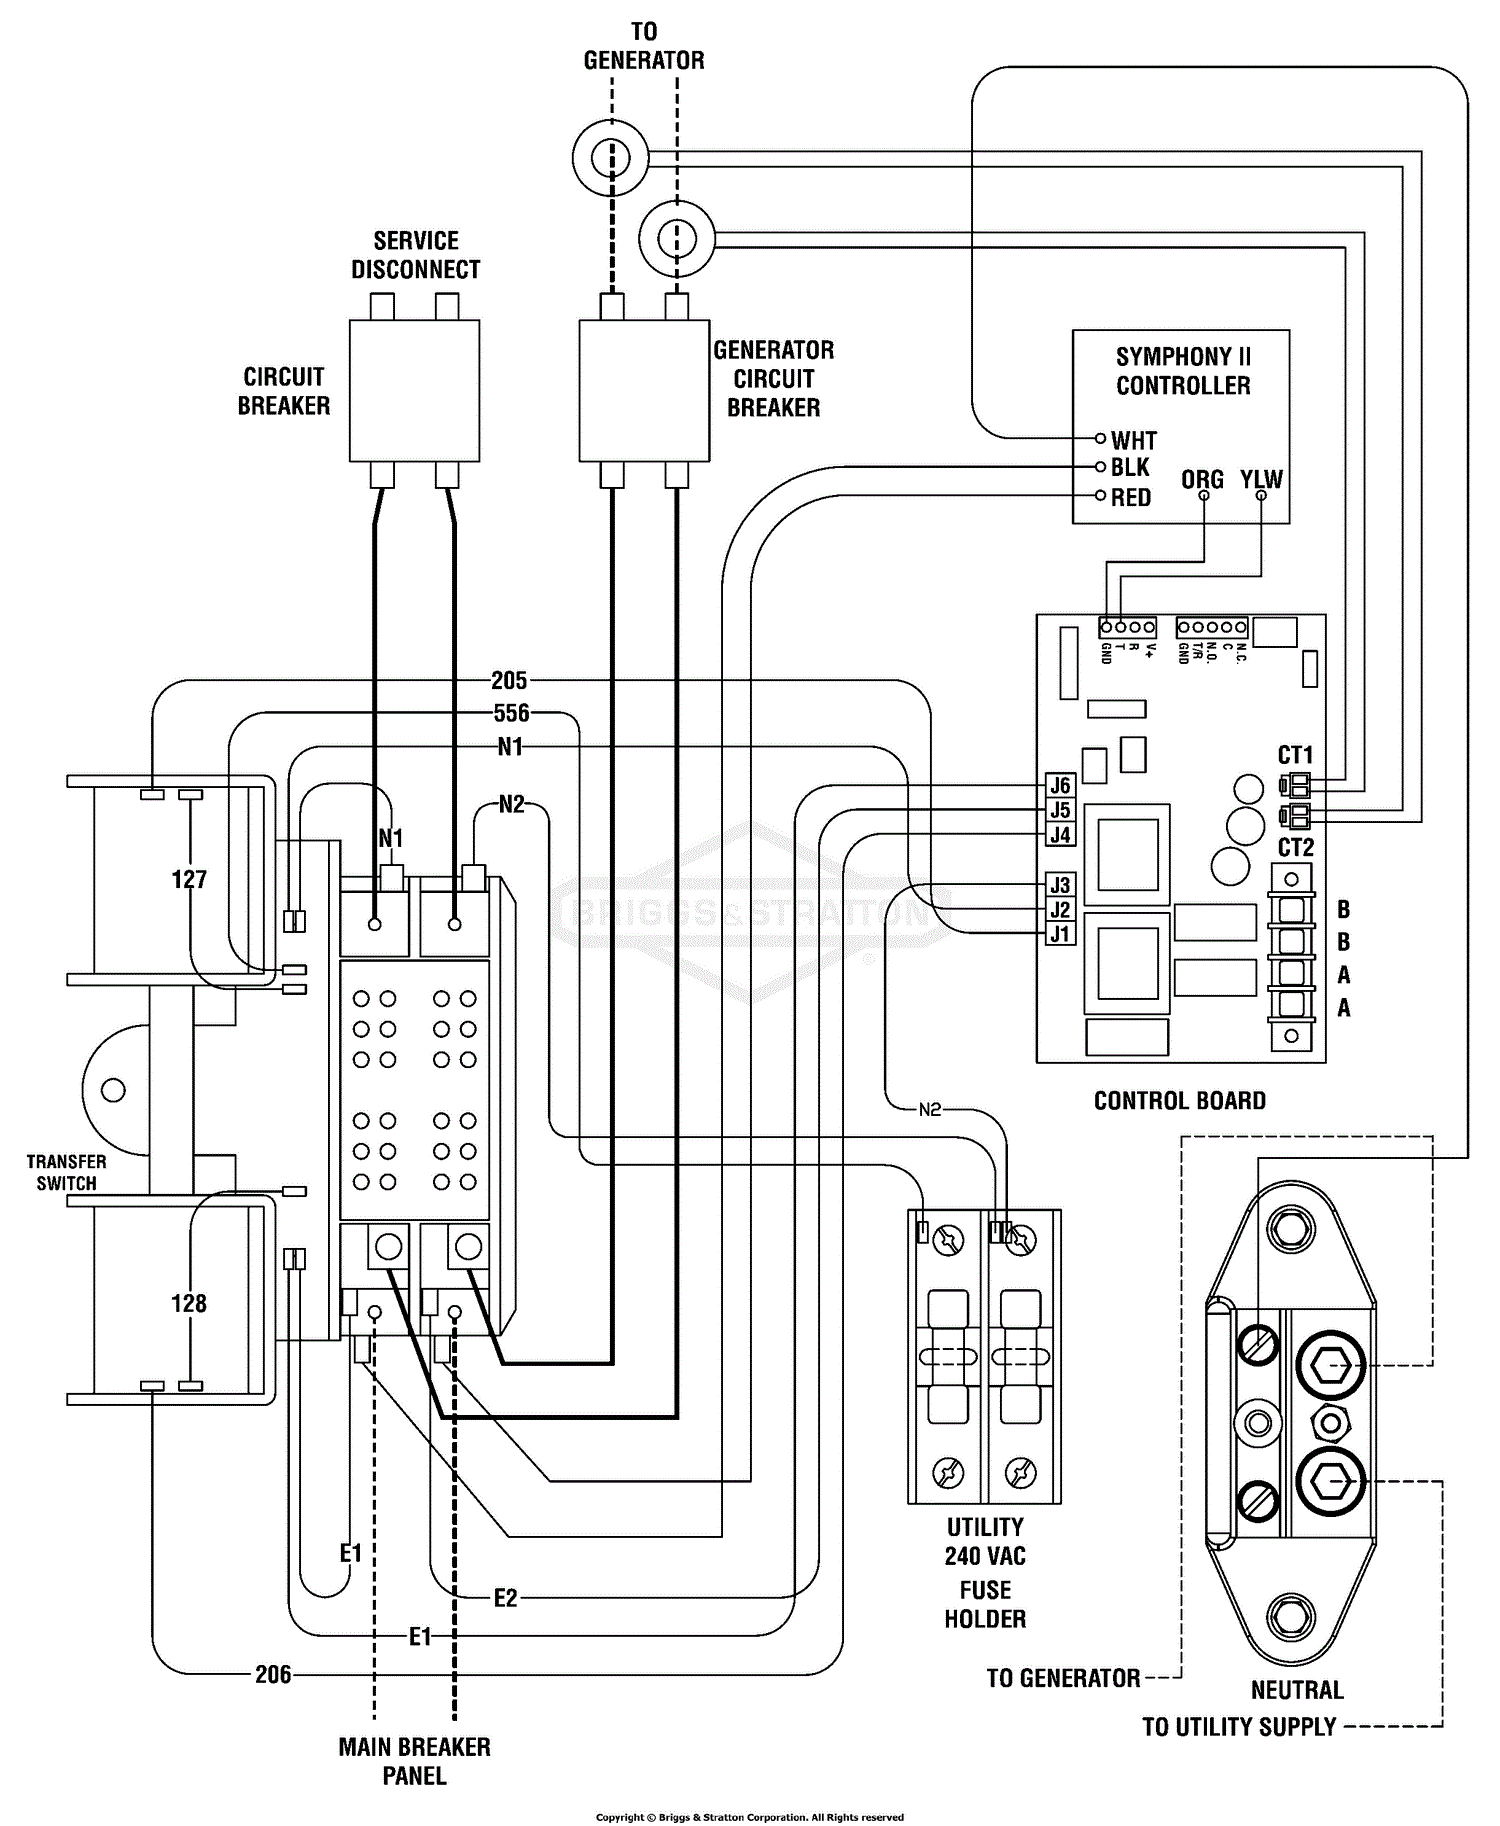 Briggs and Stratton Power Products 071070-01 - 150 Amp Transfer Switch  w/Symphony II Parts Diagram for Wiring Diagram - Transfer Switch Whole House Generator Jacks Small Engines